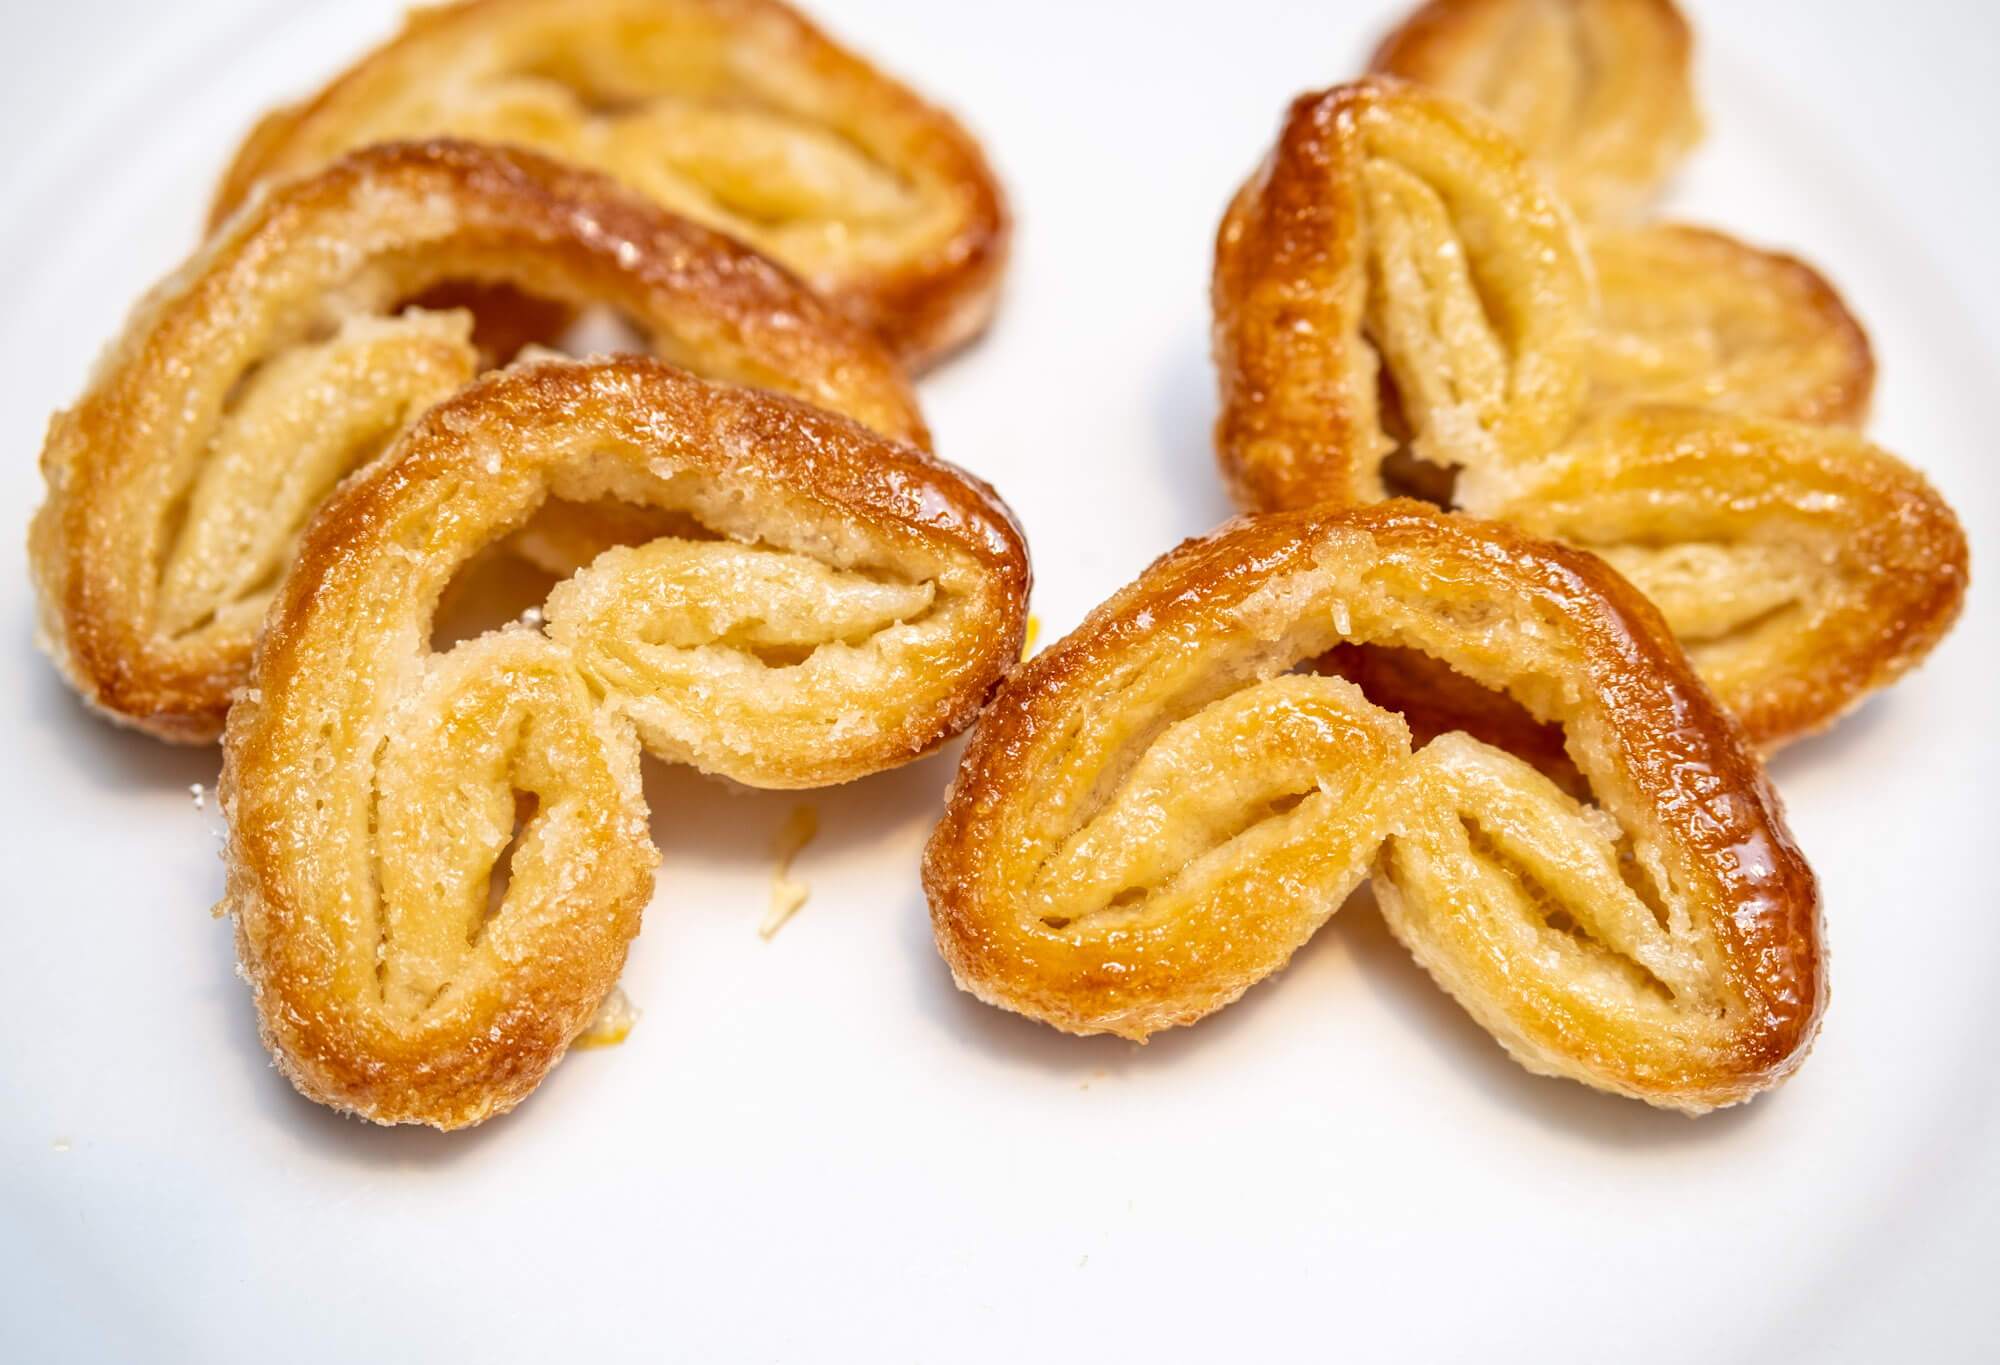 Palmier cookies made from leftover French puff pastry